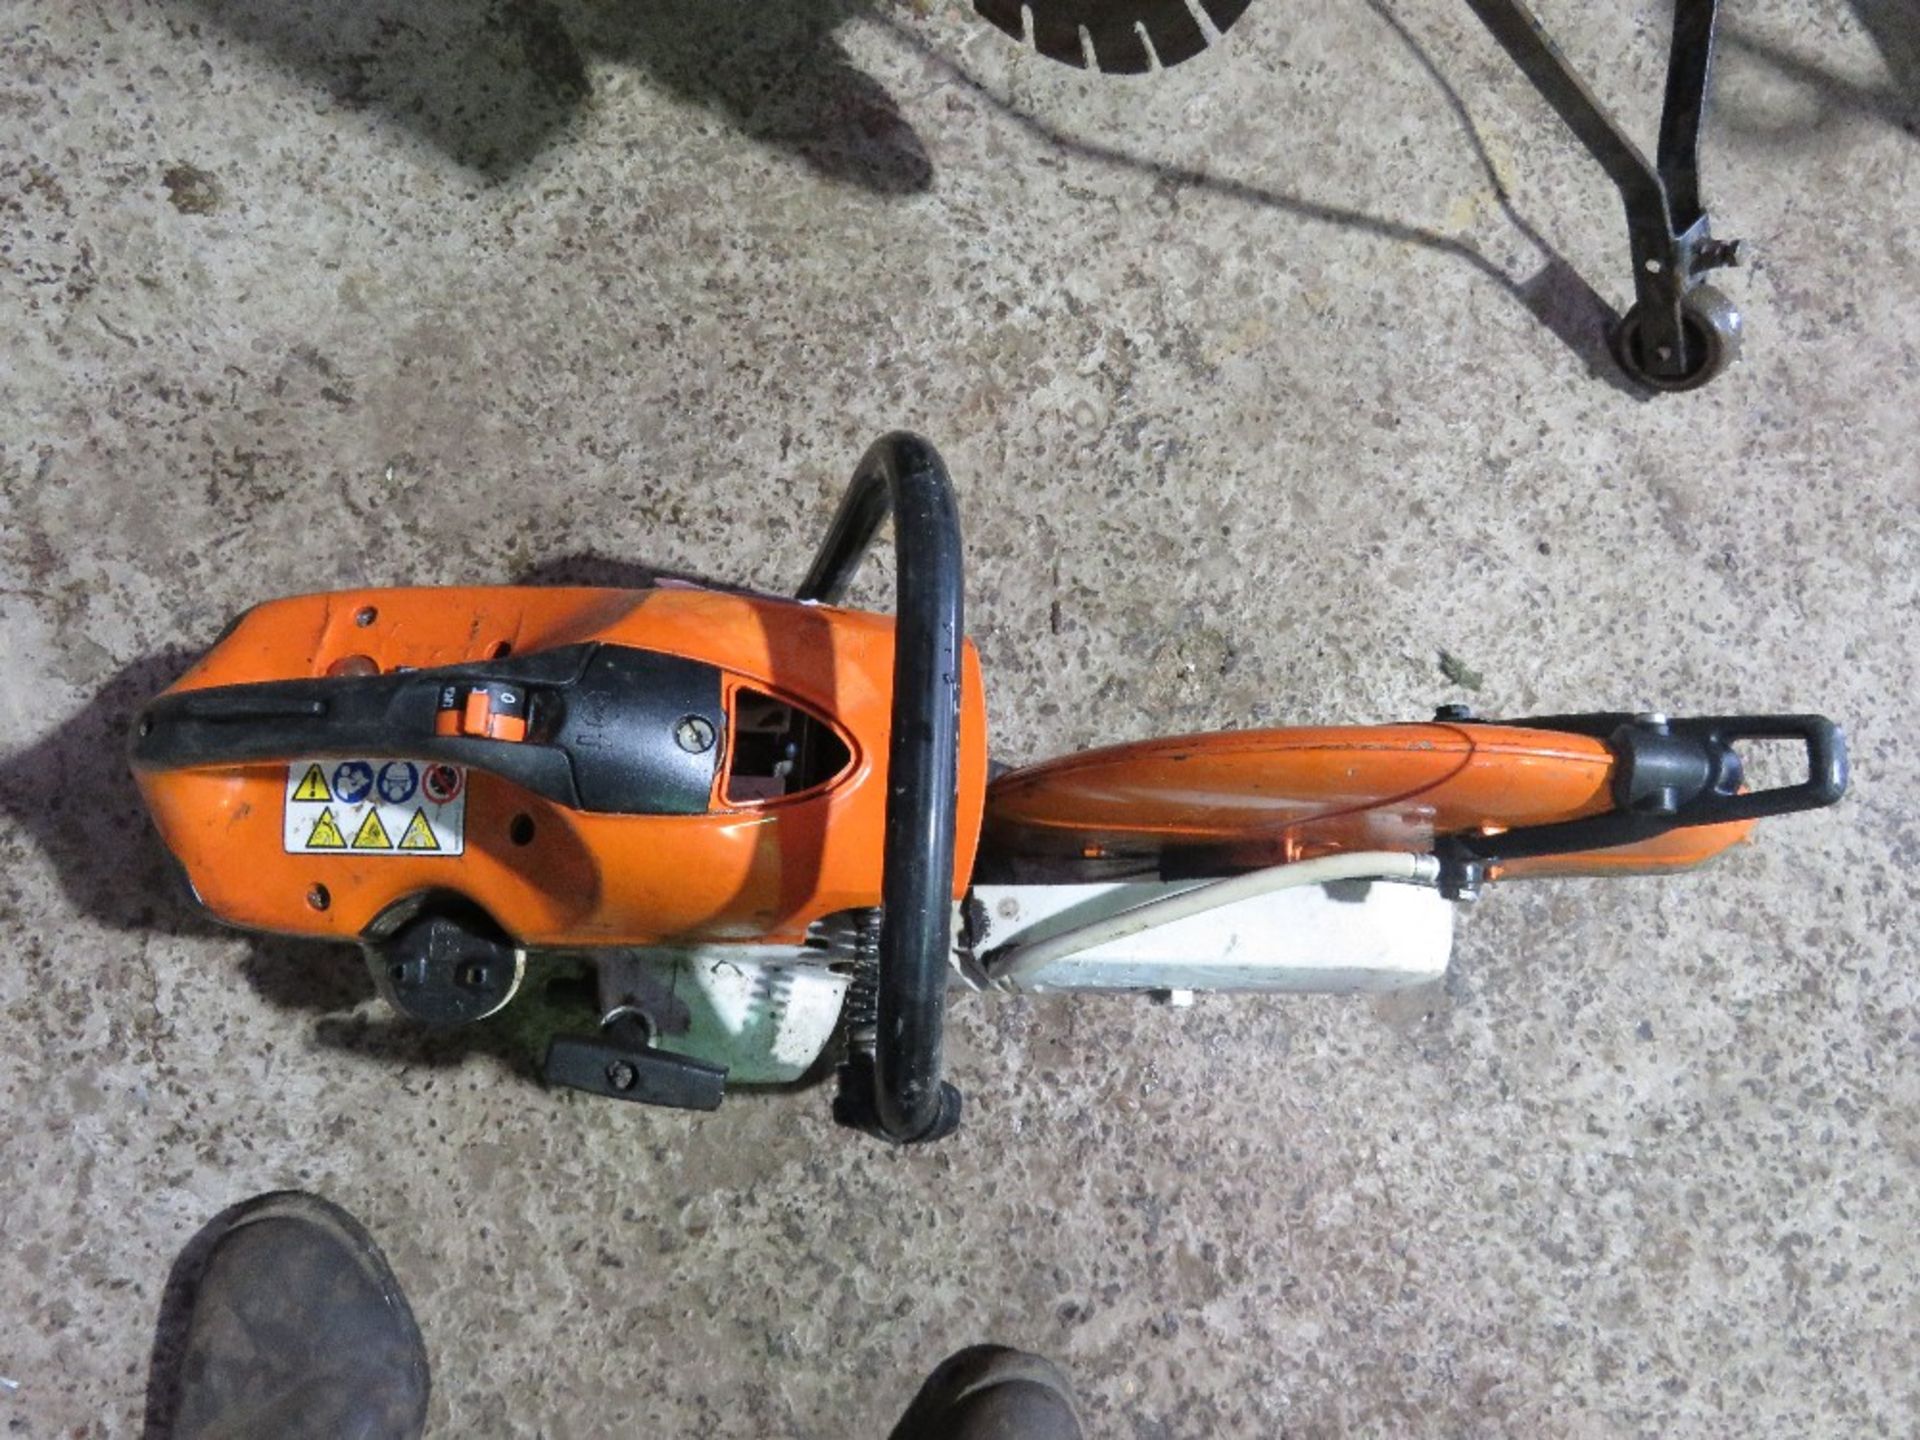 STIHL TS410 PETROL ENGINED CUT OFF SAW. THIS LOT IS SOLD UNDER THE AUCTIONEERS MARGIN SCHEME, THE - Image 3 of 4